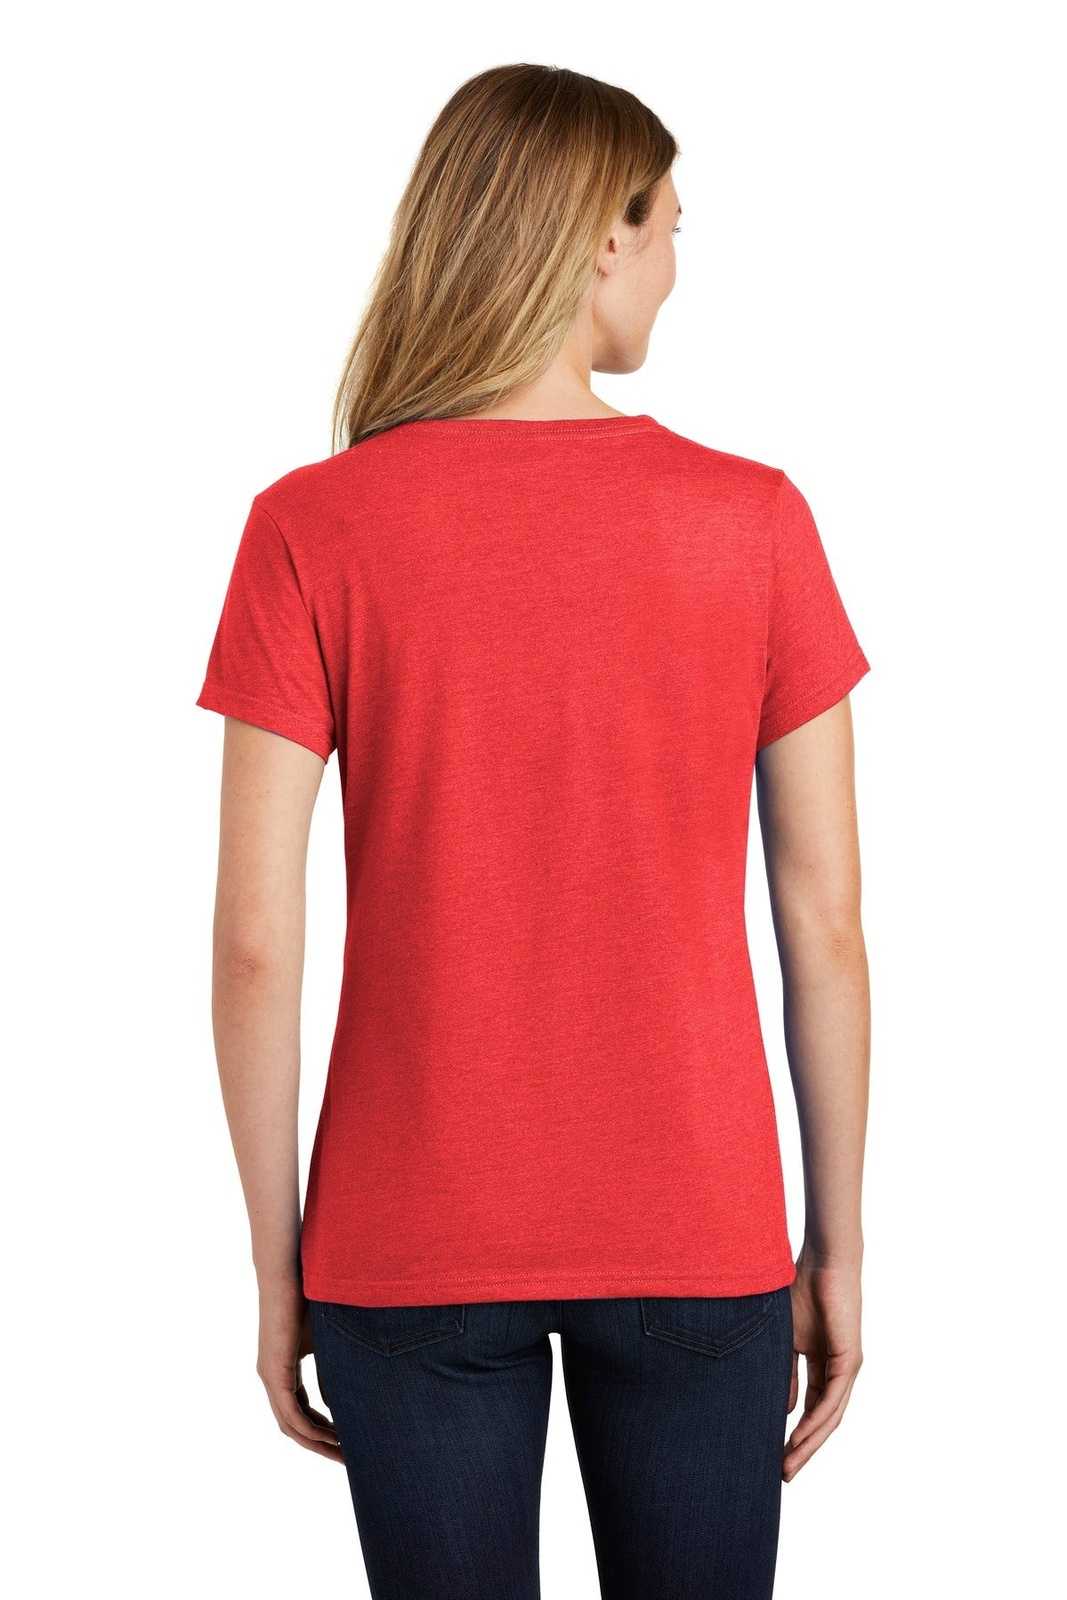 Port &amp; Company LPC455V Ladies Fan Favorite Blend V-Neck Tee - Bright Red Heather - HIT a Double - 2